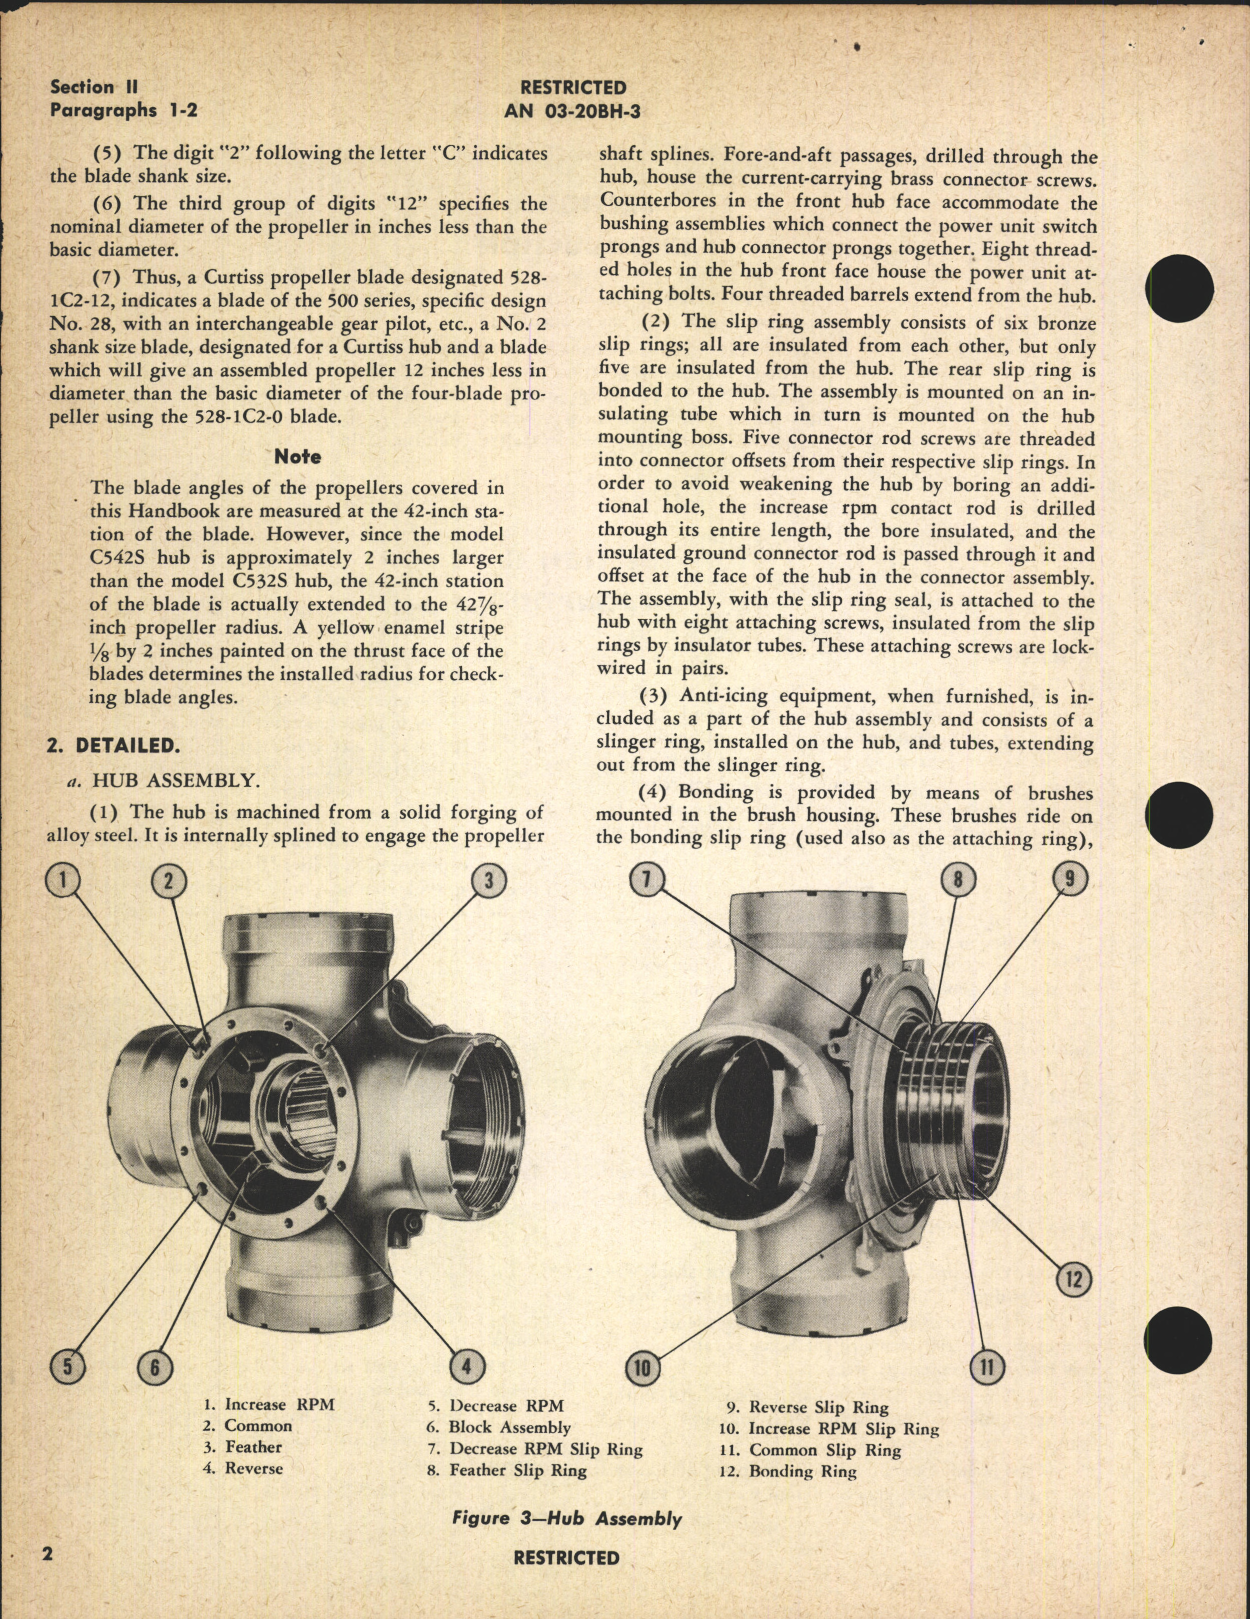 Sample page 6 from AirCorps Library document: Operation, Service, & Overhaul Instructions with Parts Catalog for Electric Propeller Model C542S-B